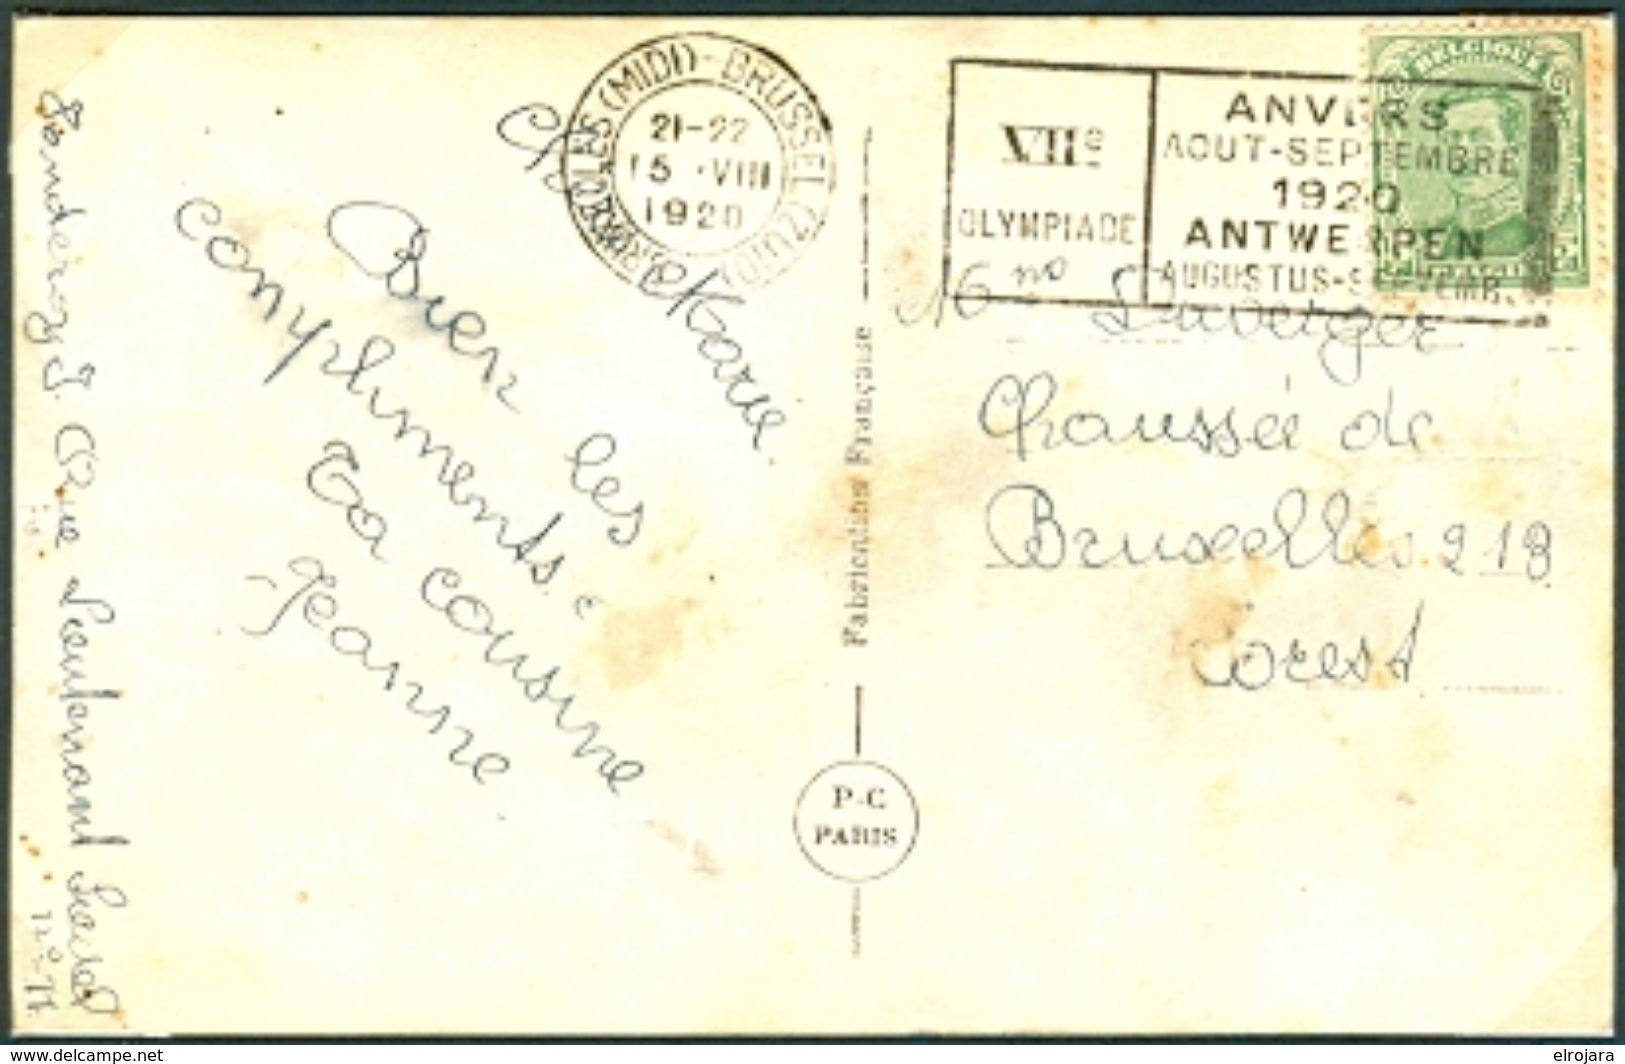 BELGIUM Postcard With Olympic Machine Cancel Bruxelles Midi Brussel Zuid Dated 15-VIII 1920 Athletic Day - Estate 1920: Anversa